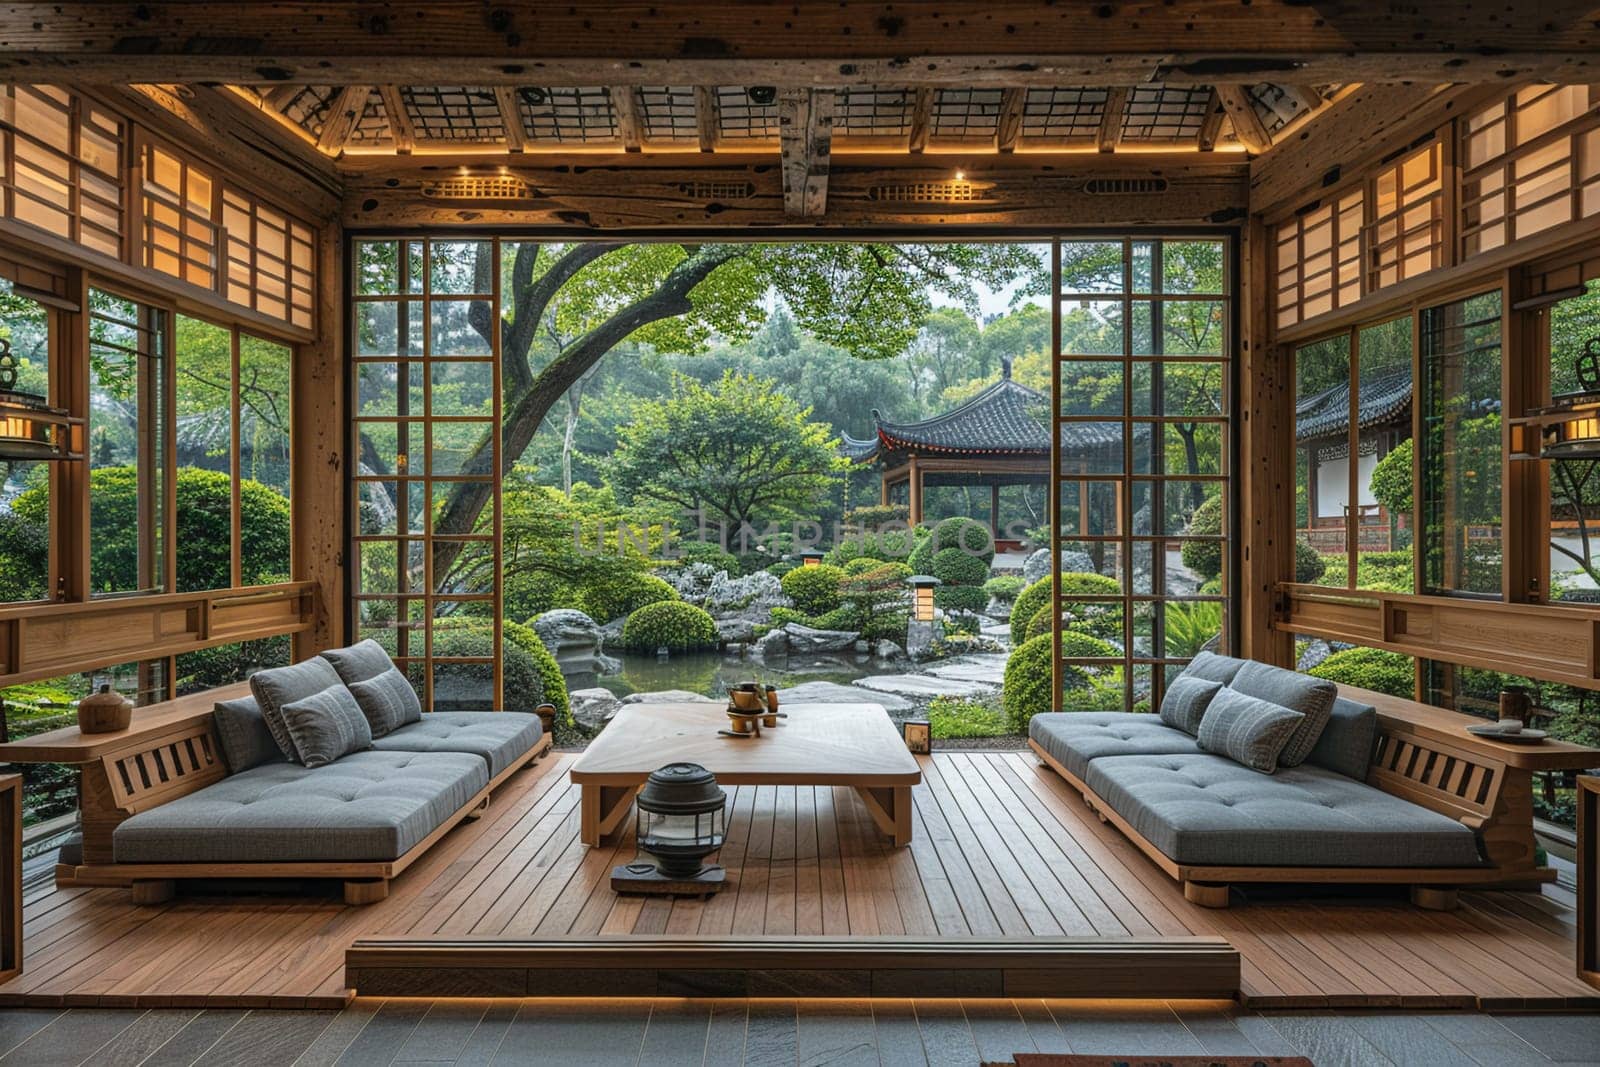 Traditional tea house with wooden architecture and peaceful garden views